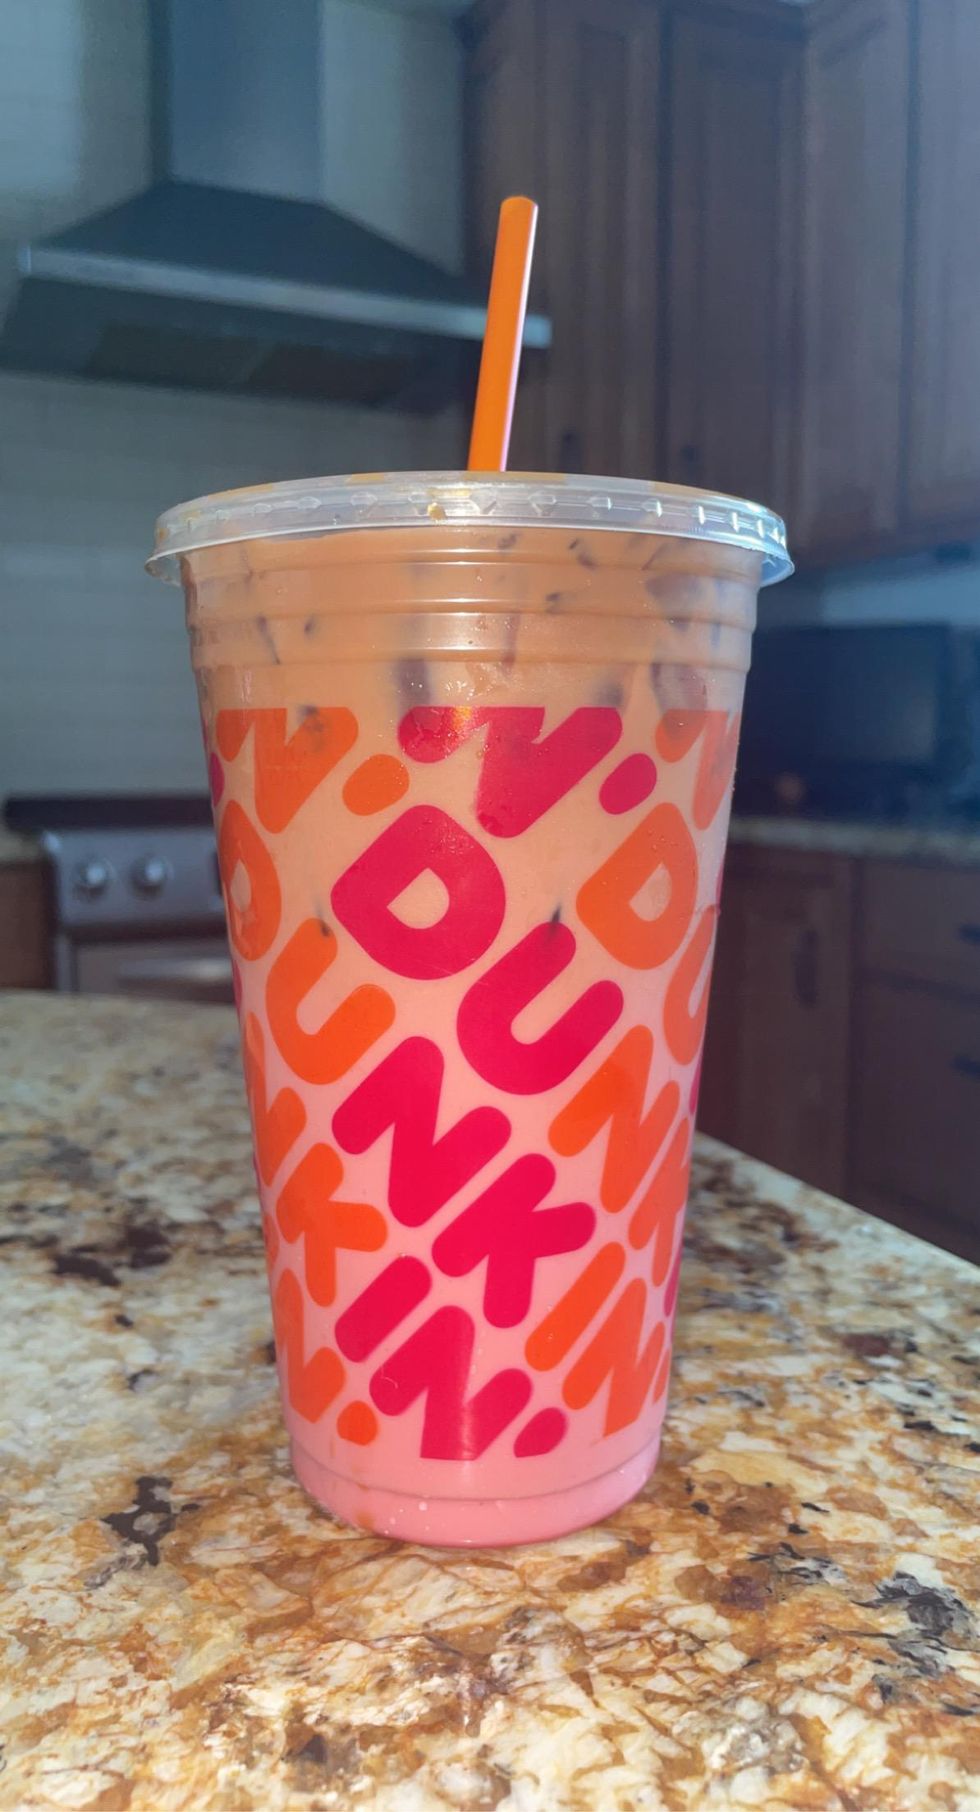 I Tried The Dunkin Pink Velvet Macchiato So You Don't Have To